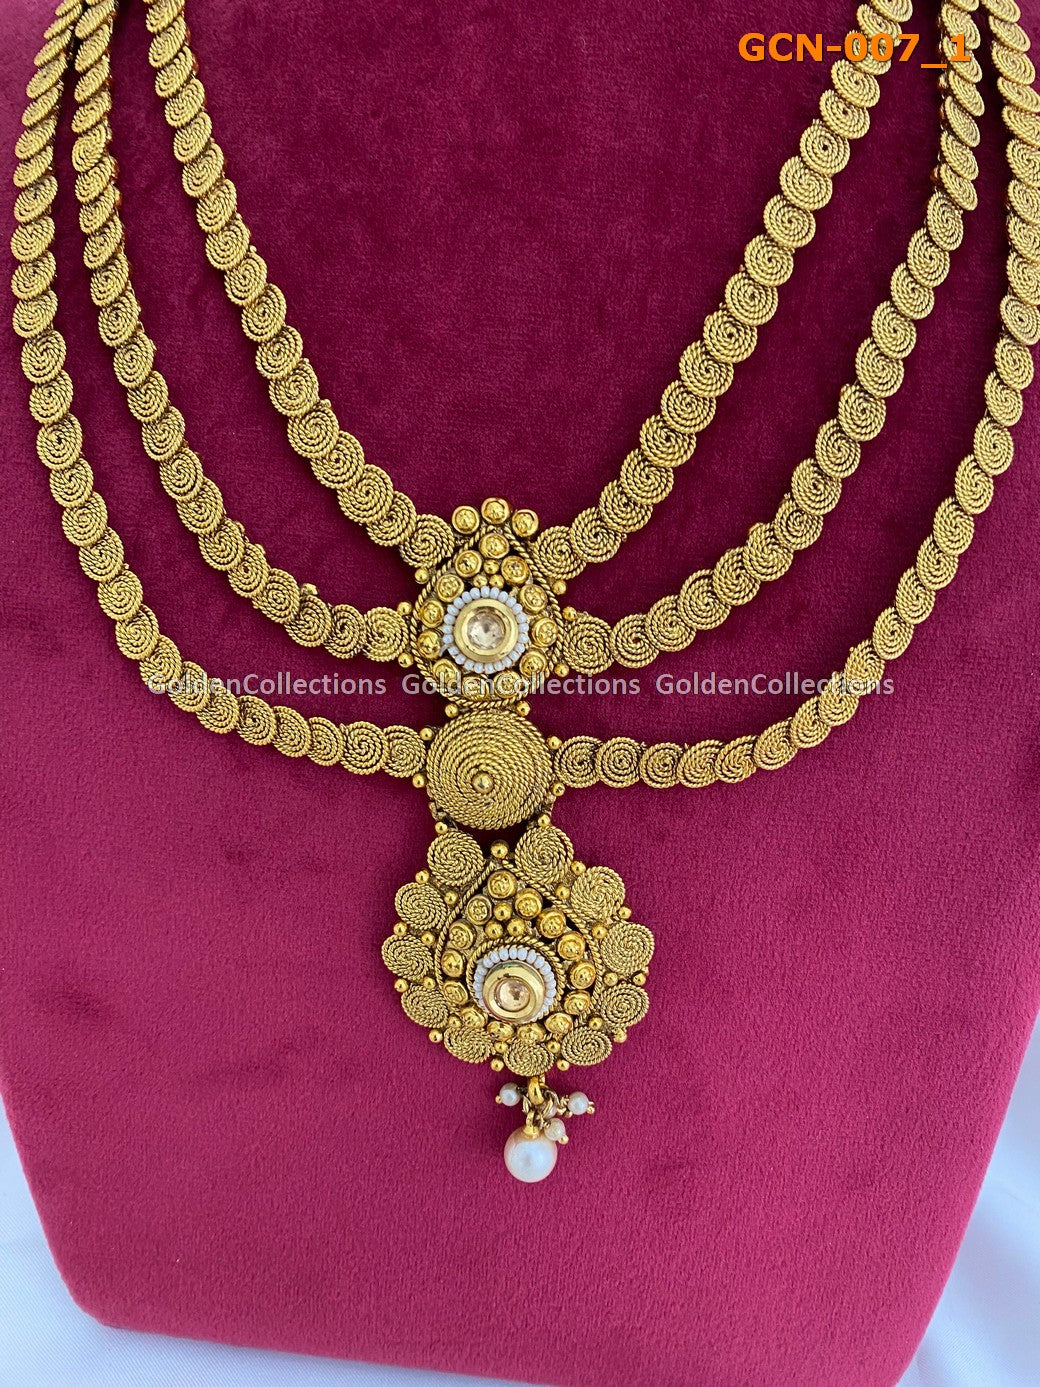 Three Layer Necklace : Handmade Necklace For Women Golden Collections 2